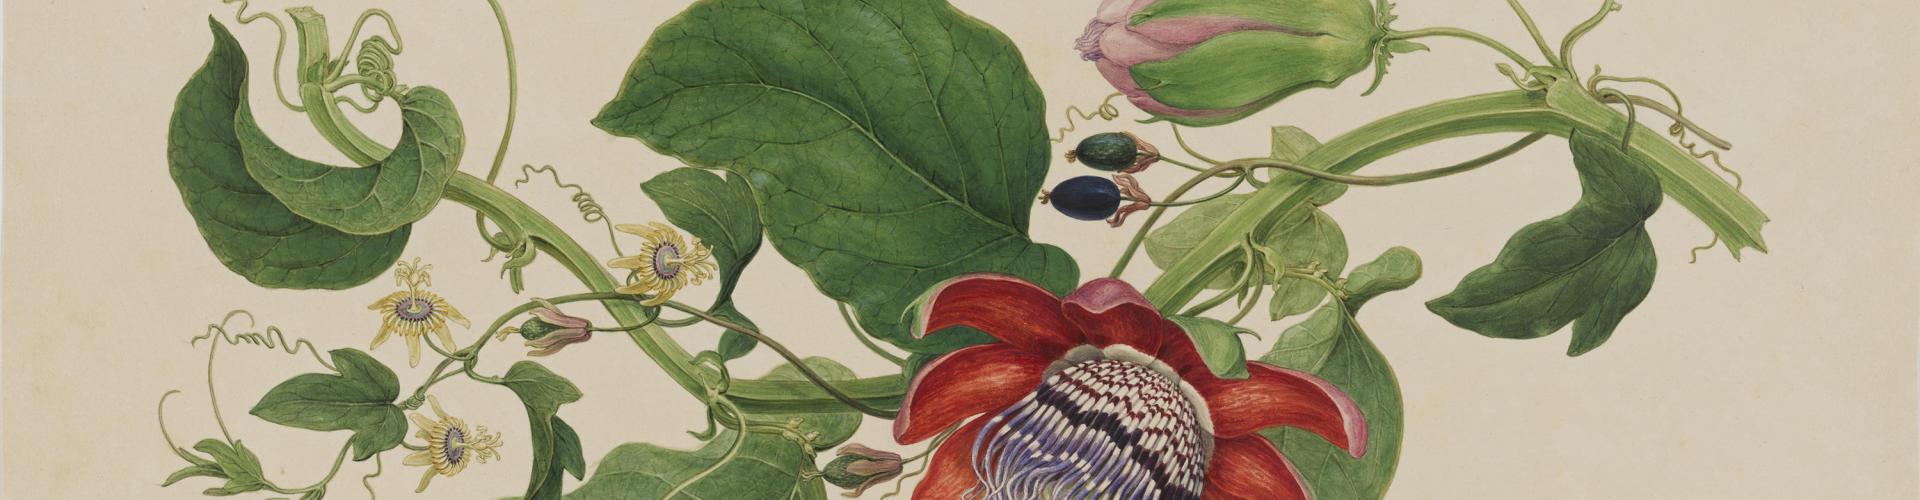 PASSIONFLOWERS (DETAIL), LONDON, C 1794, PRIVATE COLLECTION (SYDNEY)